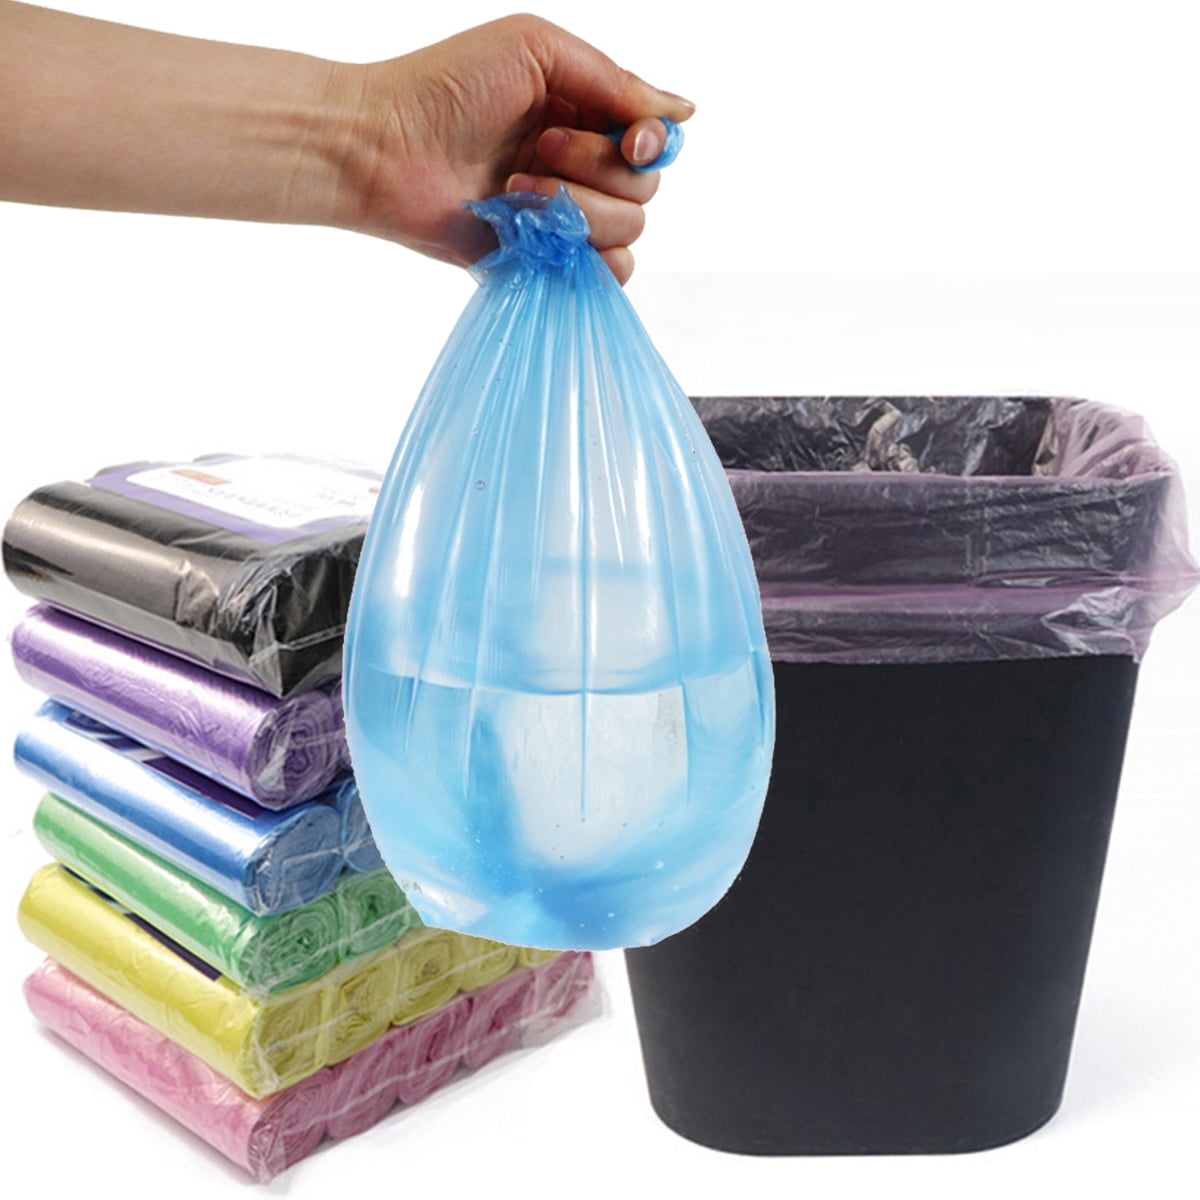 PlasticMill 100 Gallon Black 2 Mil 67x79 50 Bags/Case Heavy Duty Garbage Bags / Trash Can Liners.